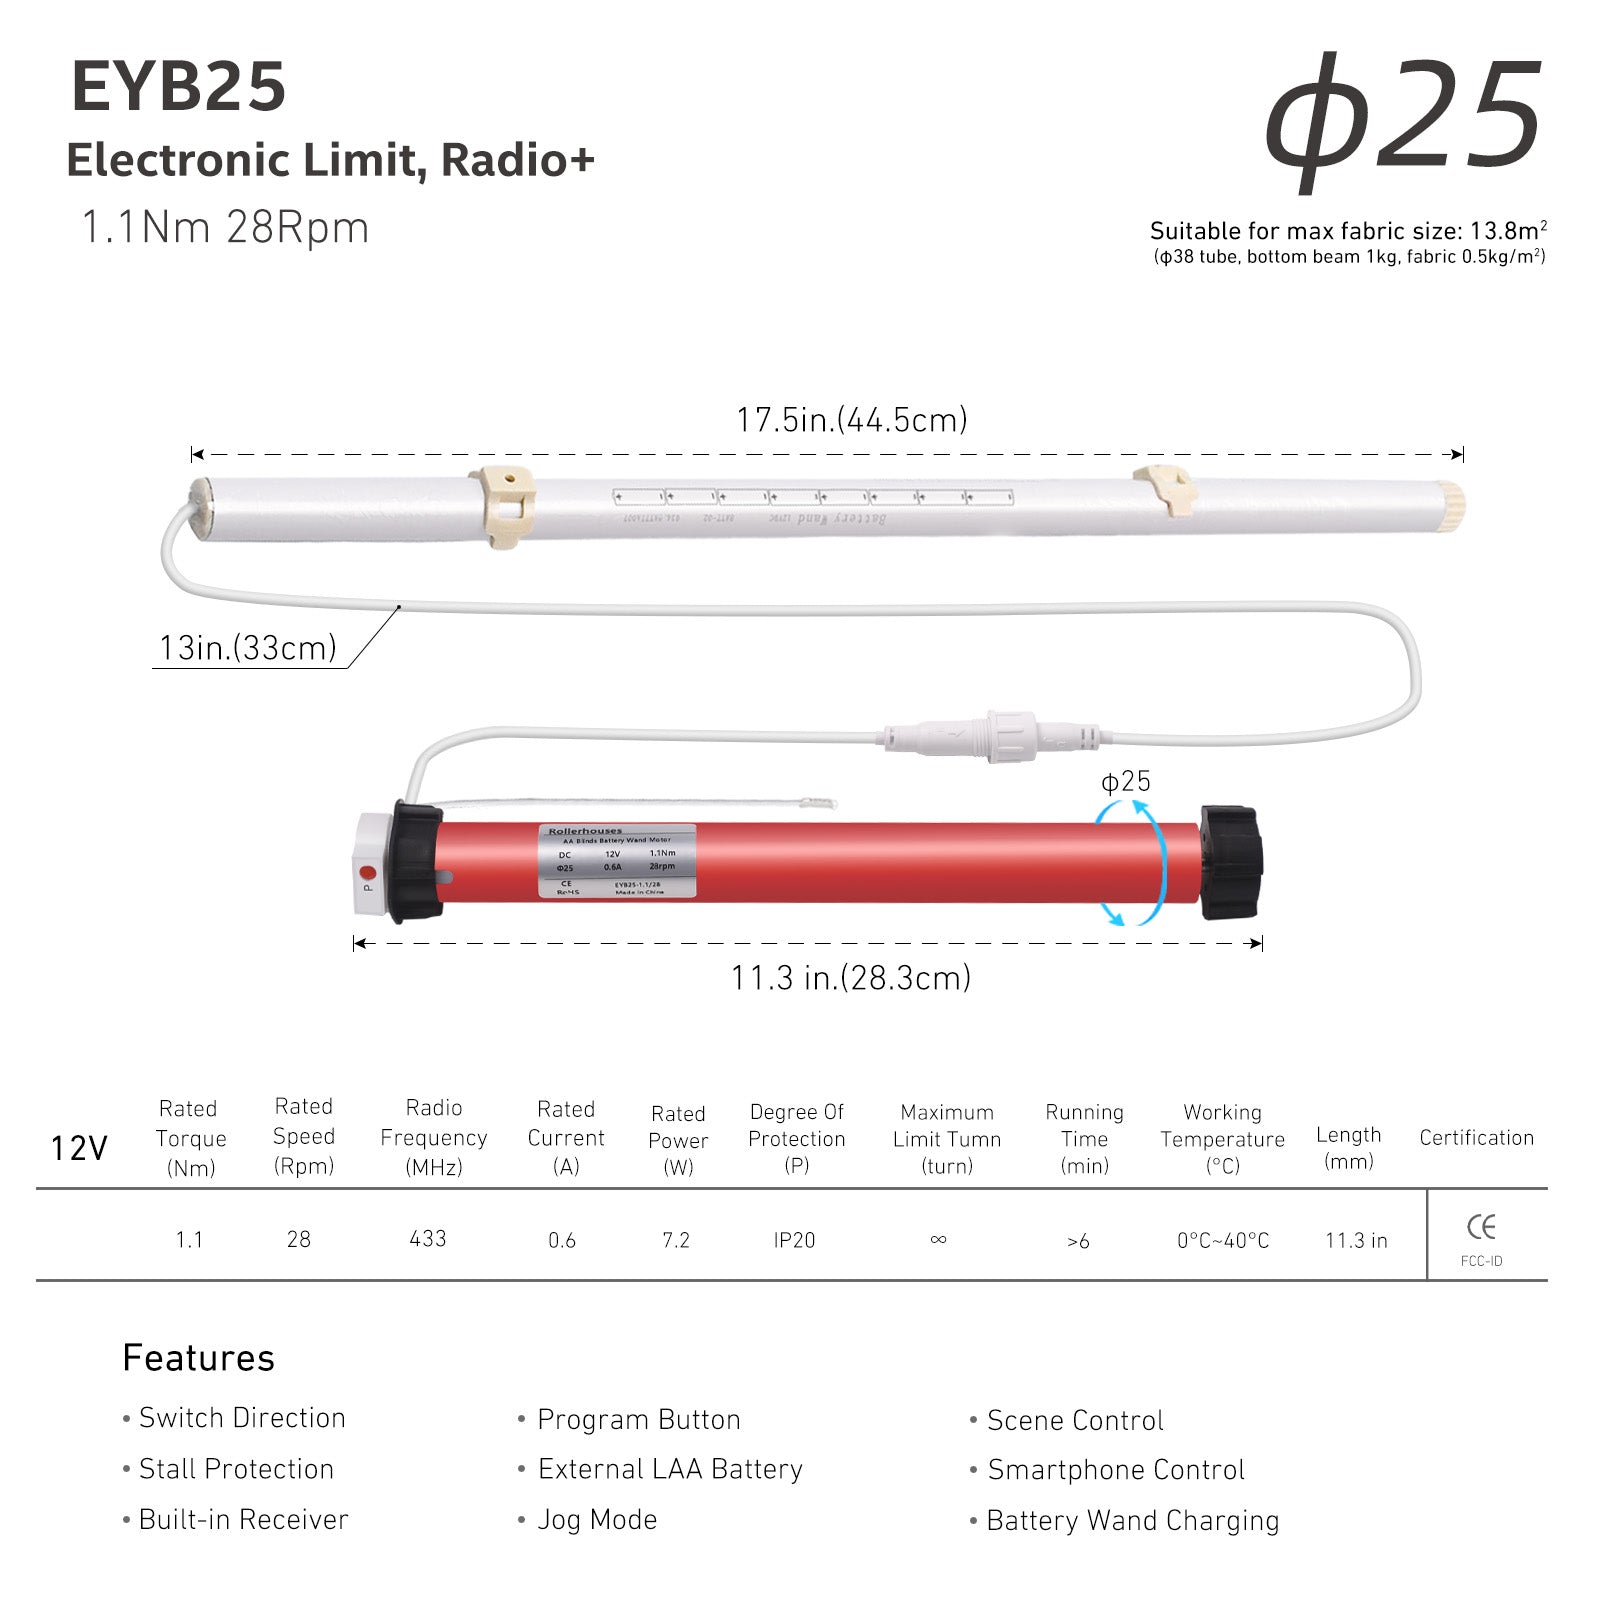 EYB25 12V DC Volt AA Reloadable Tube/Wand Battery Powered Roller Shade Motor with Remote Control for Motorized Shades - Power Blinds & Shades.